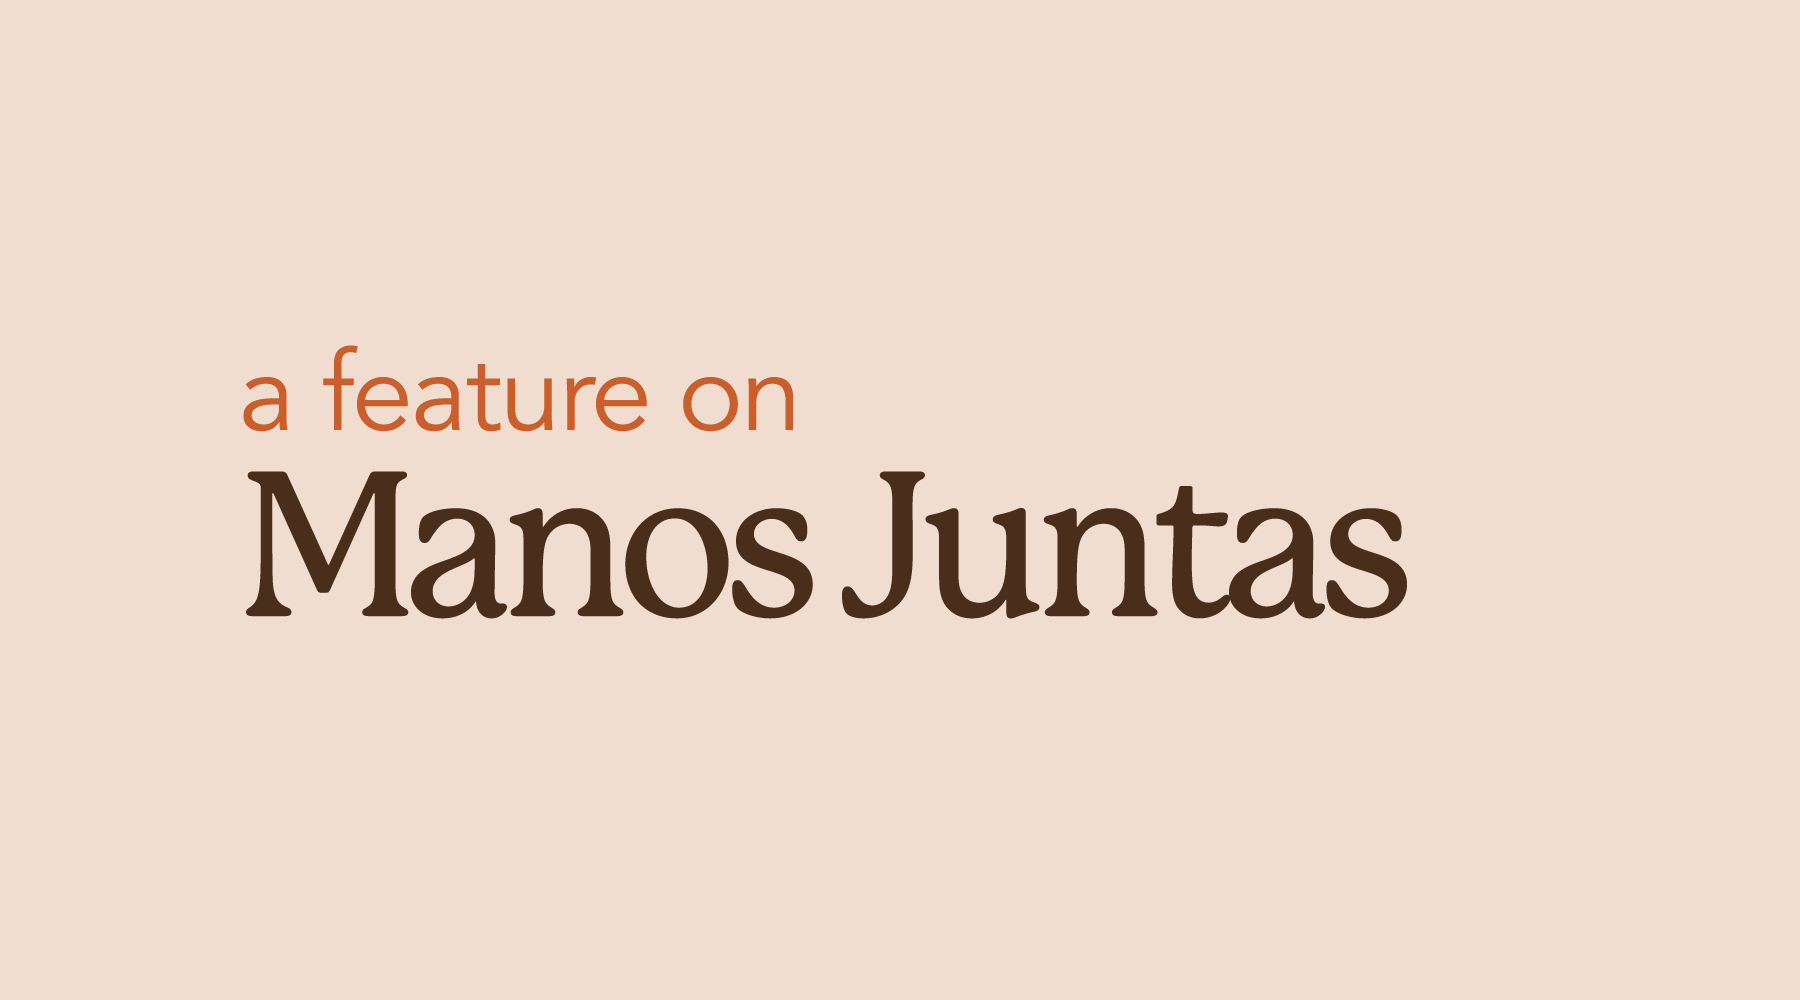 Tan colored graphic with text saying "a feature on Manos Juntas"